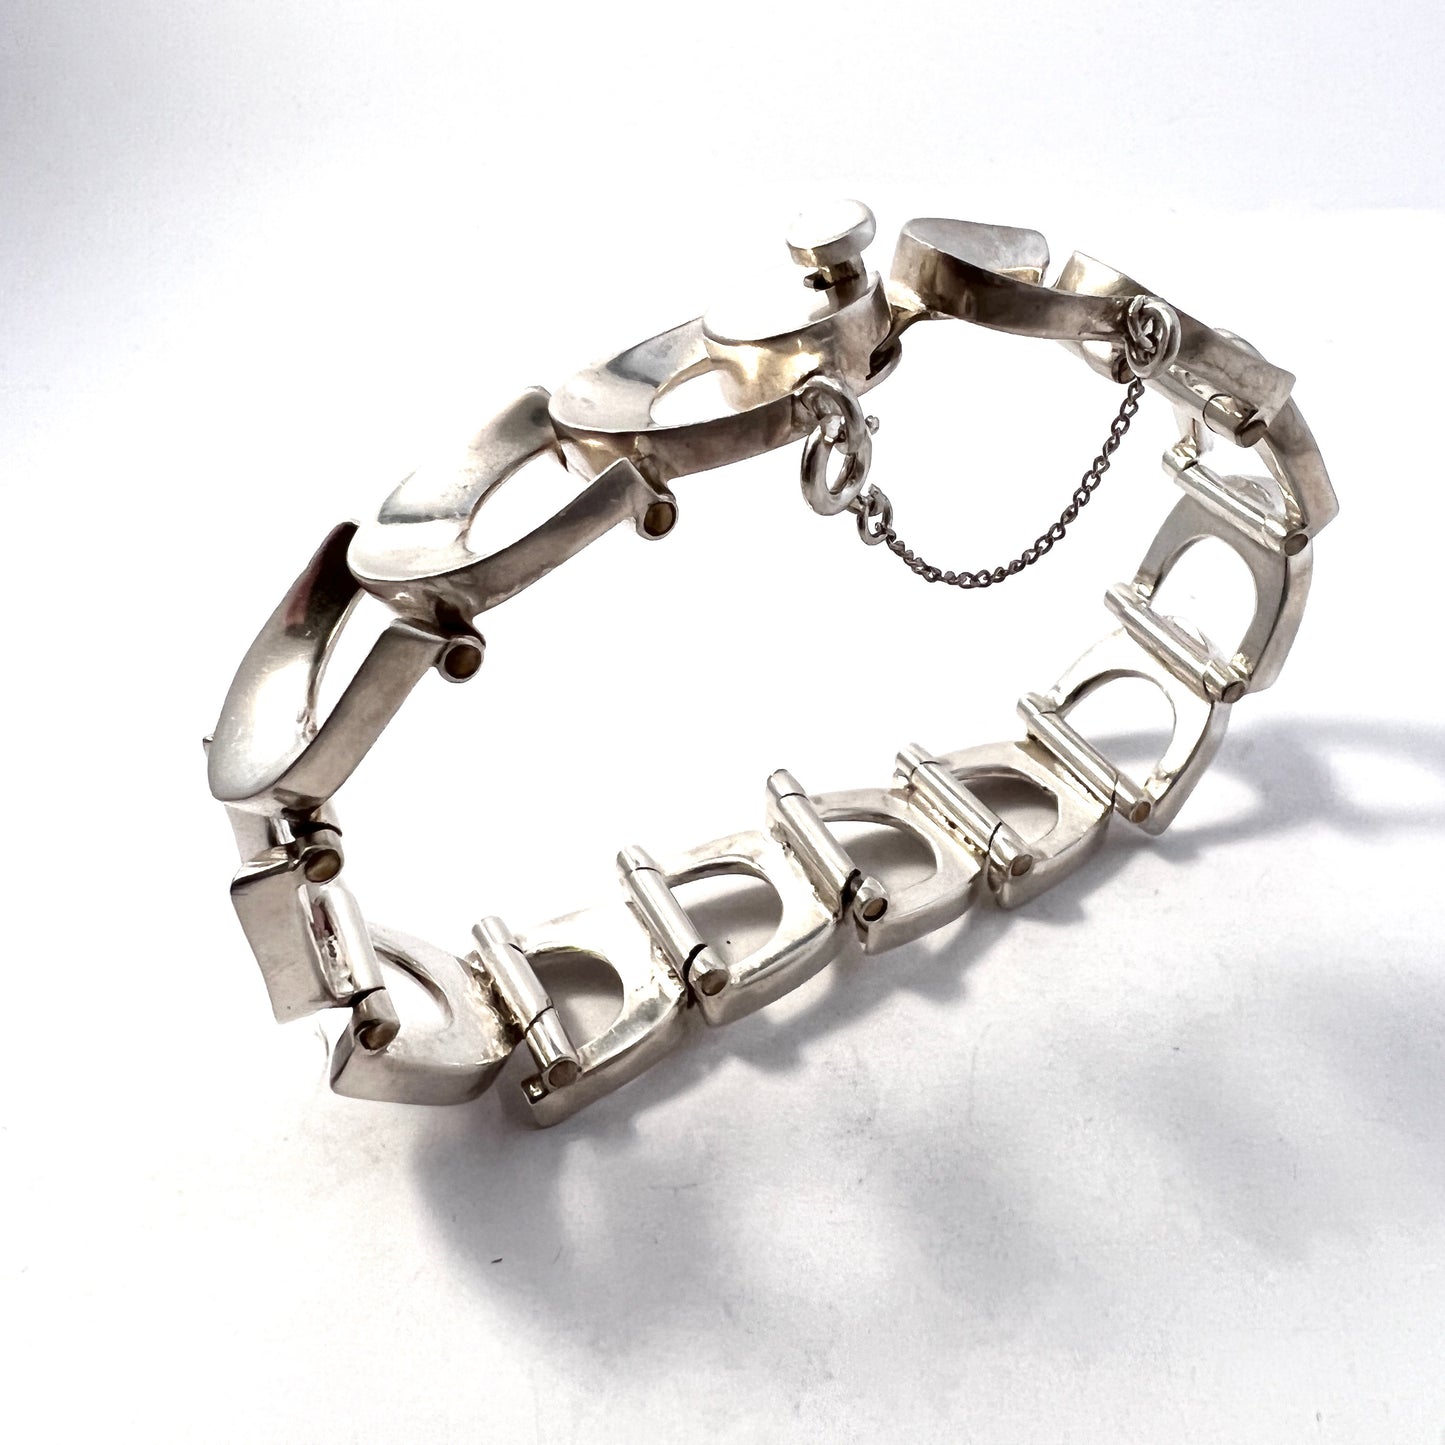 Taxco, Mexico 1950s. Chunky Mid Century Sterling Silver Bracelet. Makers Mark.